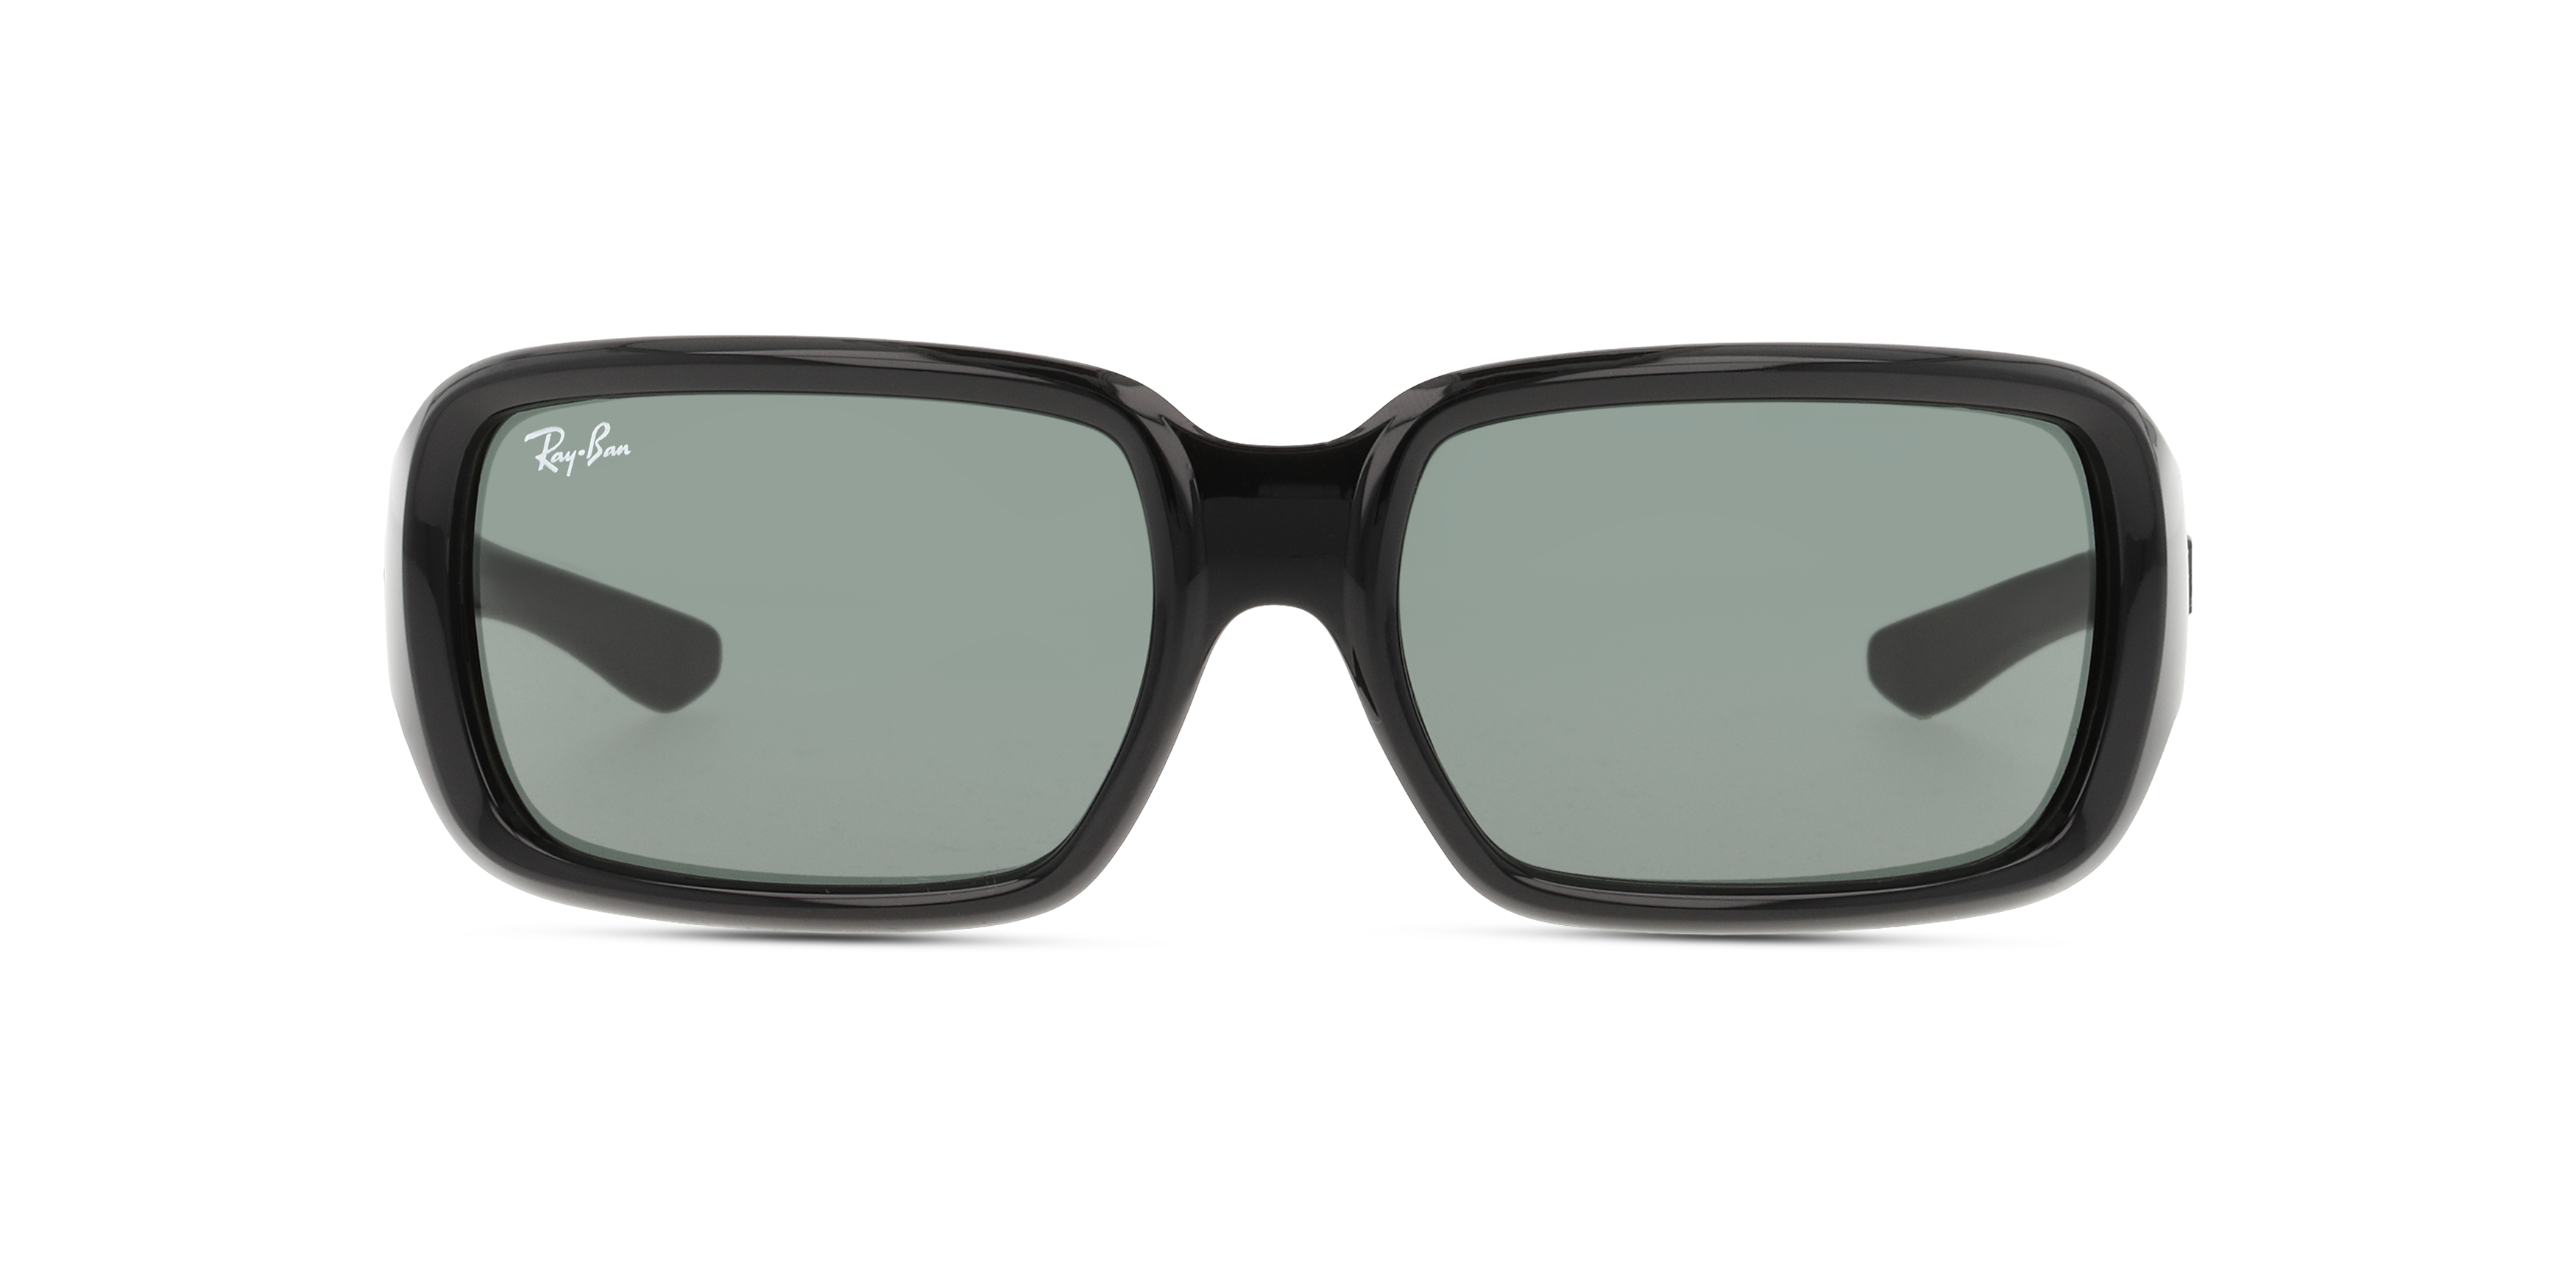 [products.image.front] RAY-BAN RJ9072S 100/71